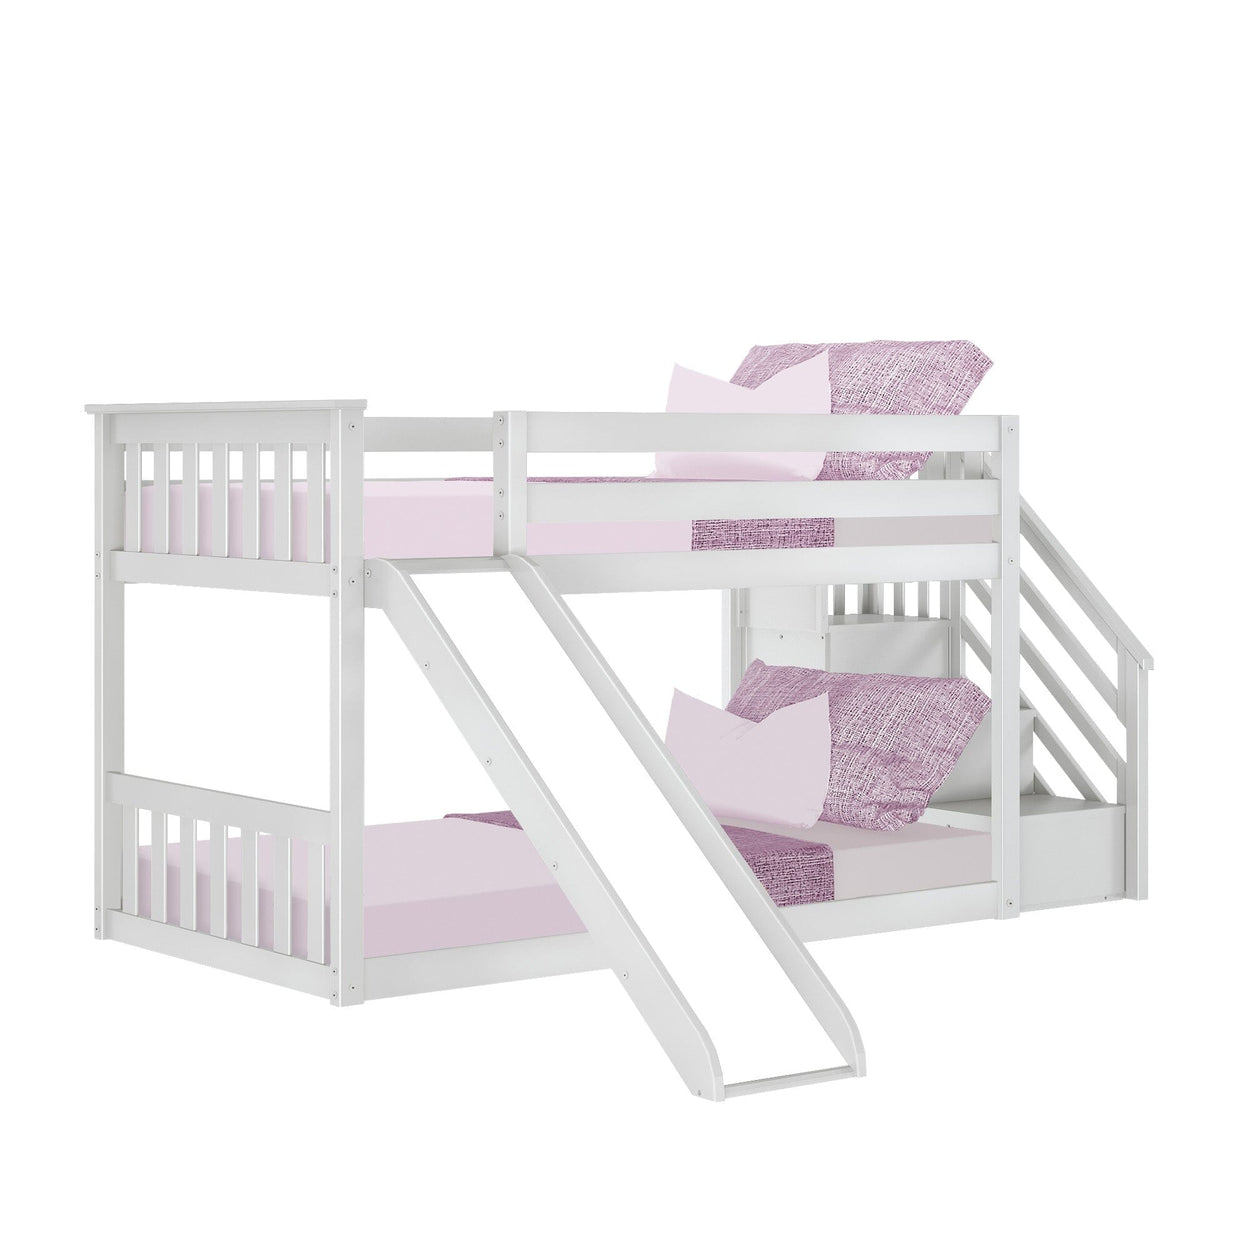 185221-002 : Bunk Beds Low Bunk w/ Staircase Bunk with Slide, White